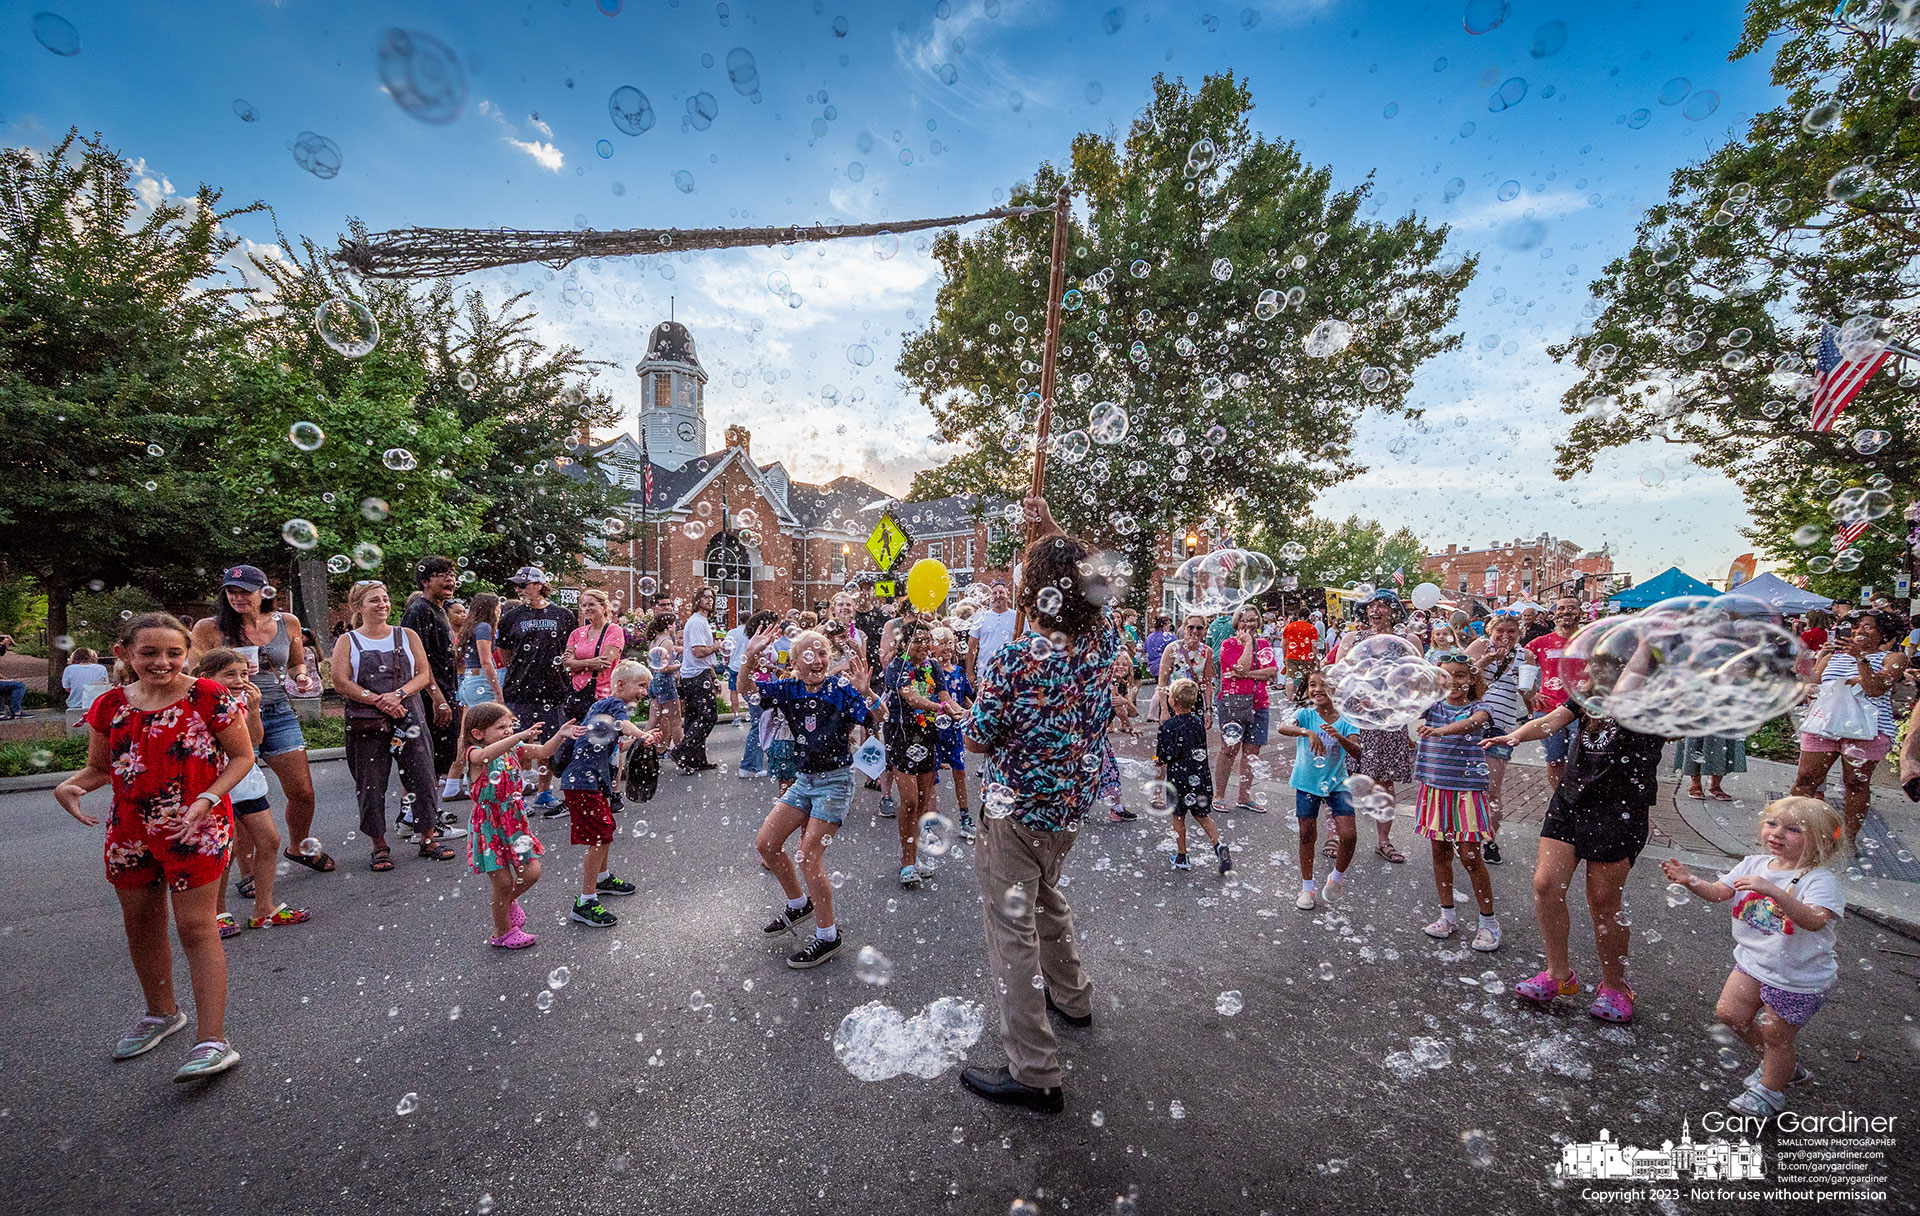 A crowd of kids delight in the explosion of bubbles created by The Giant Bubble Maker on his stop in front of city hall during Fourth Friday in Uptown Westerville. My Final Photo for July 28, 2023.